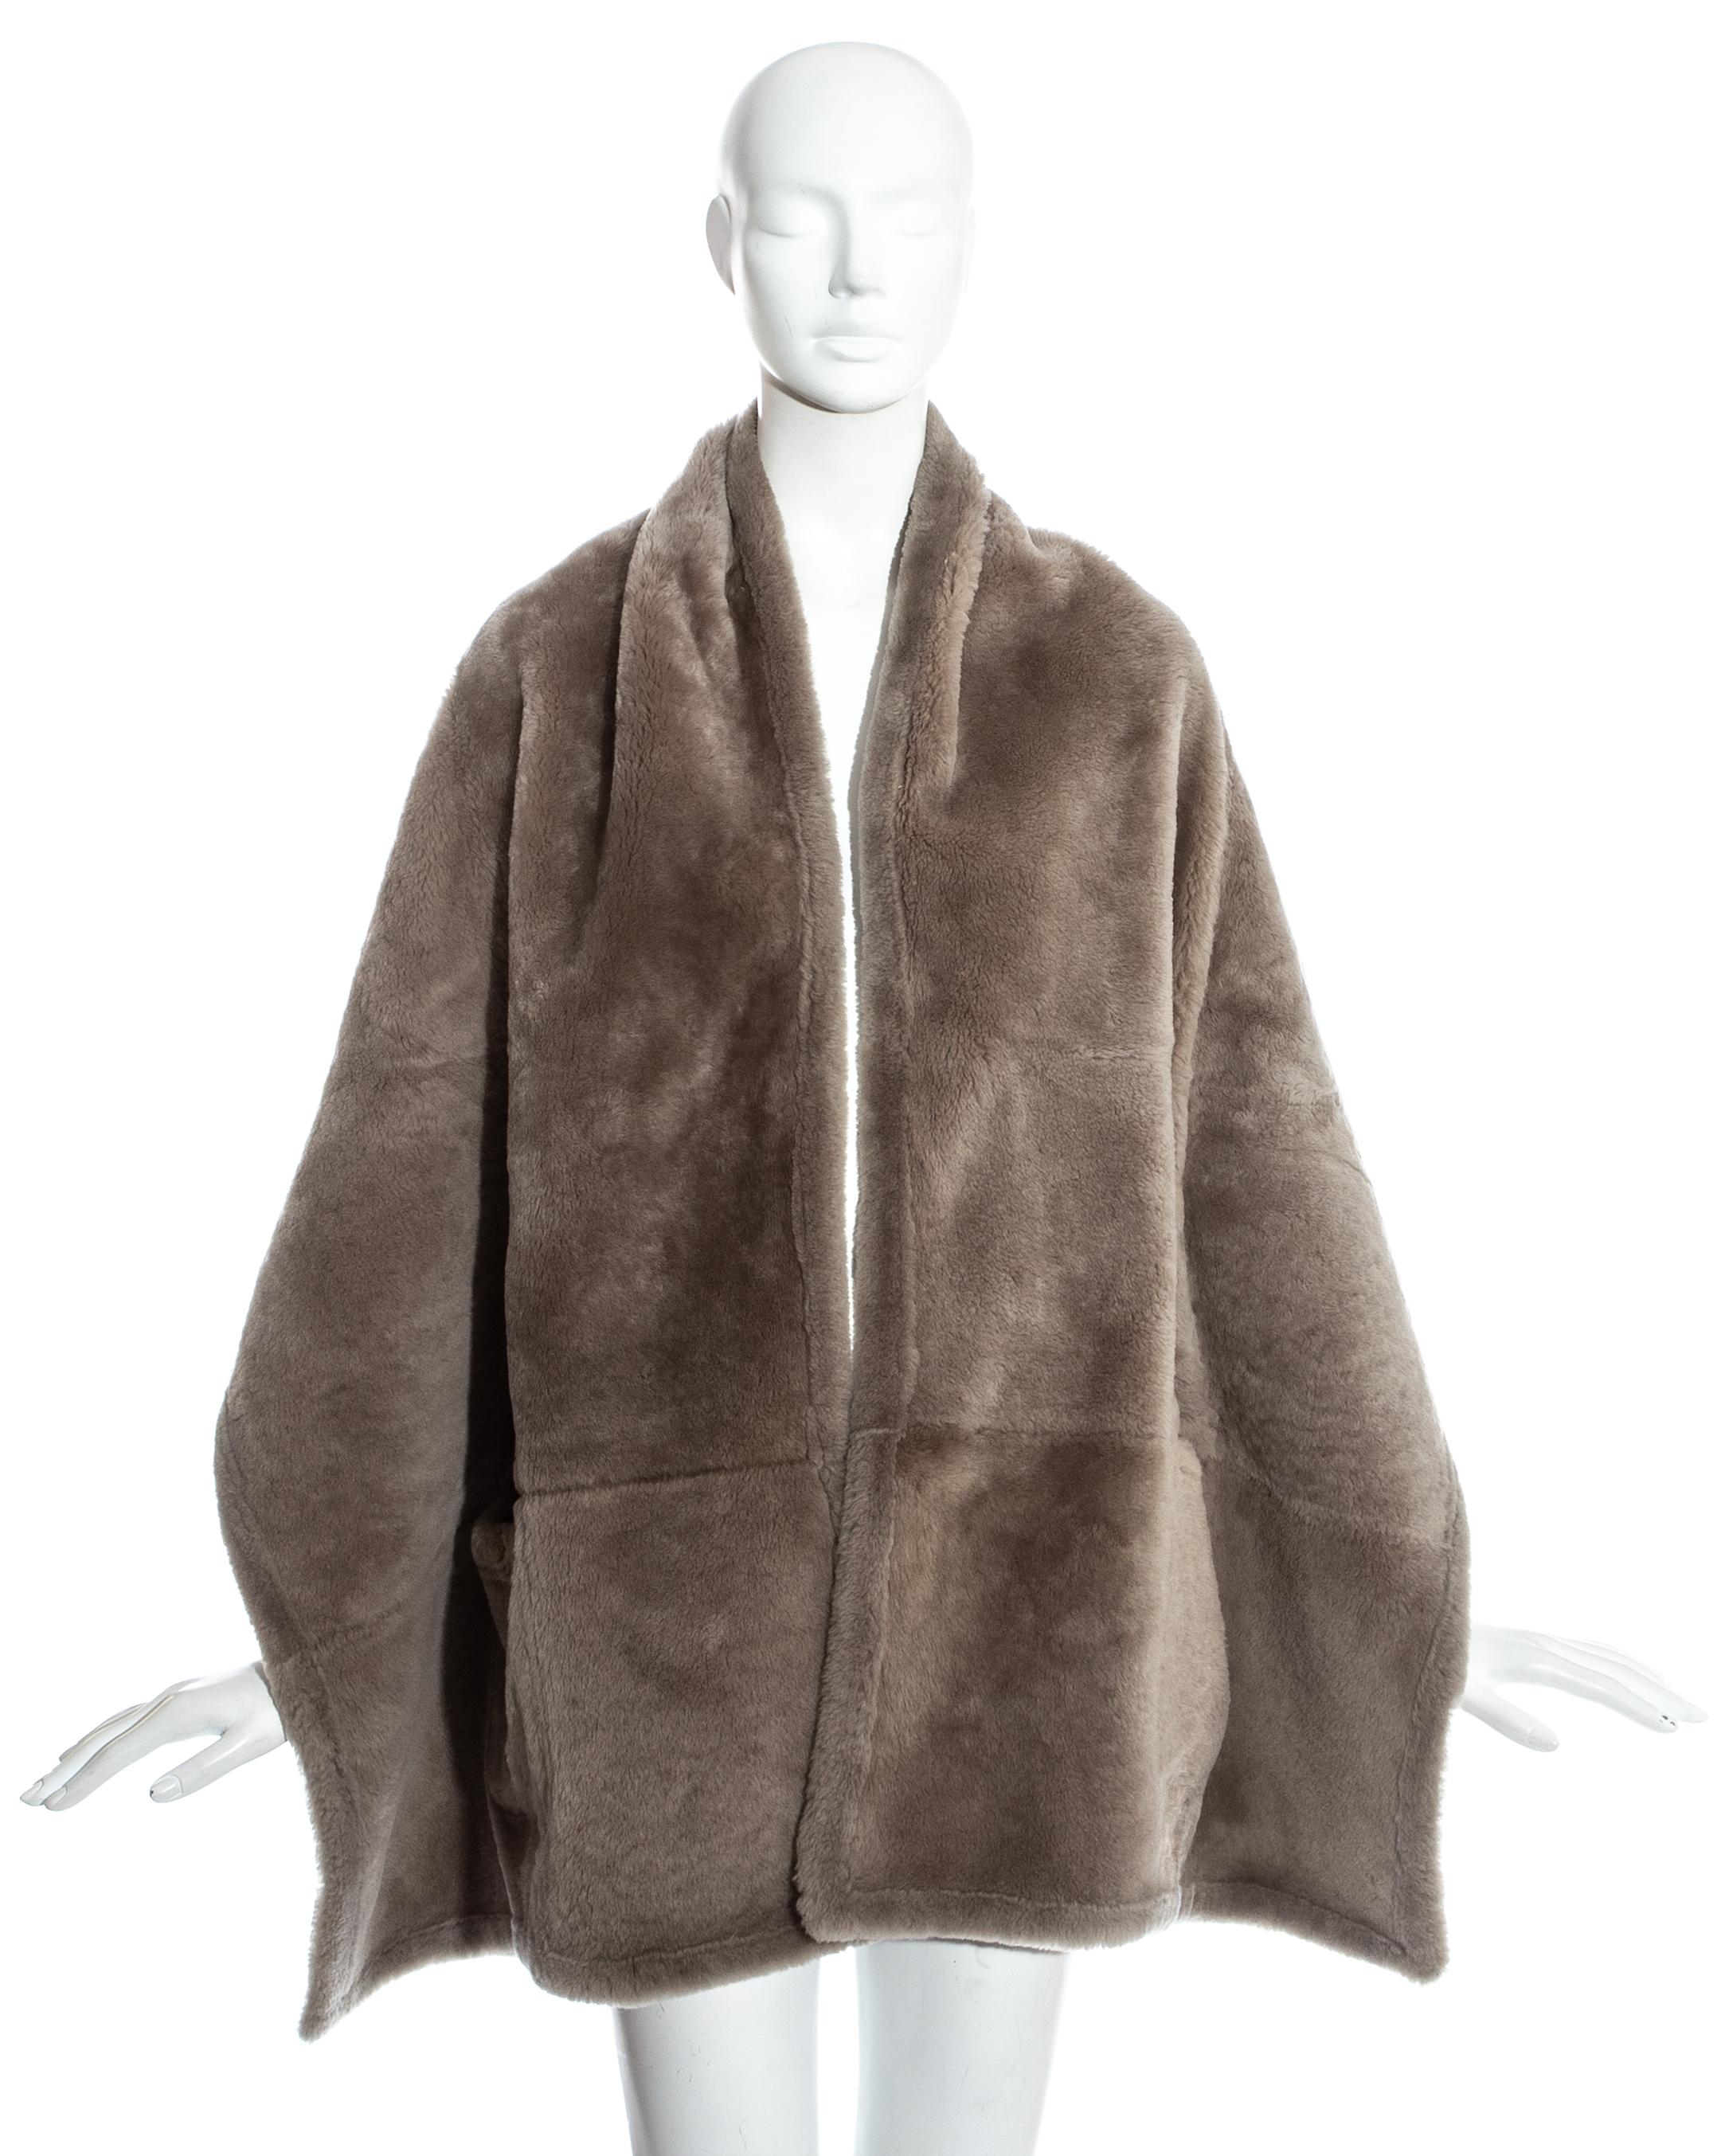 Hermes by Martin Margiela; mushroom shearling lambskin leather reversible stole. Two front patch pockets.   

Fall-Winter 1999